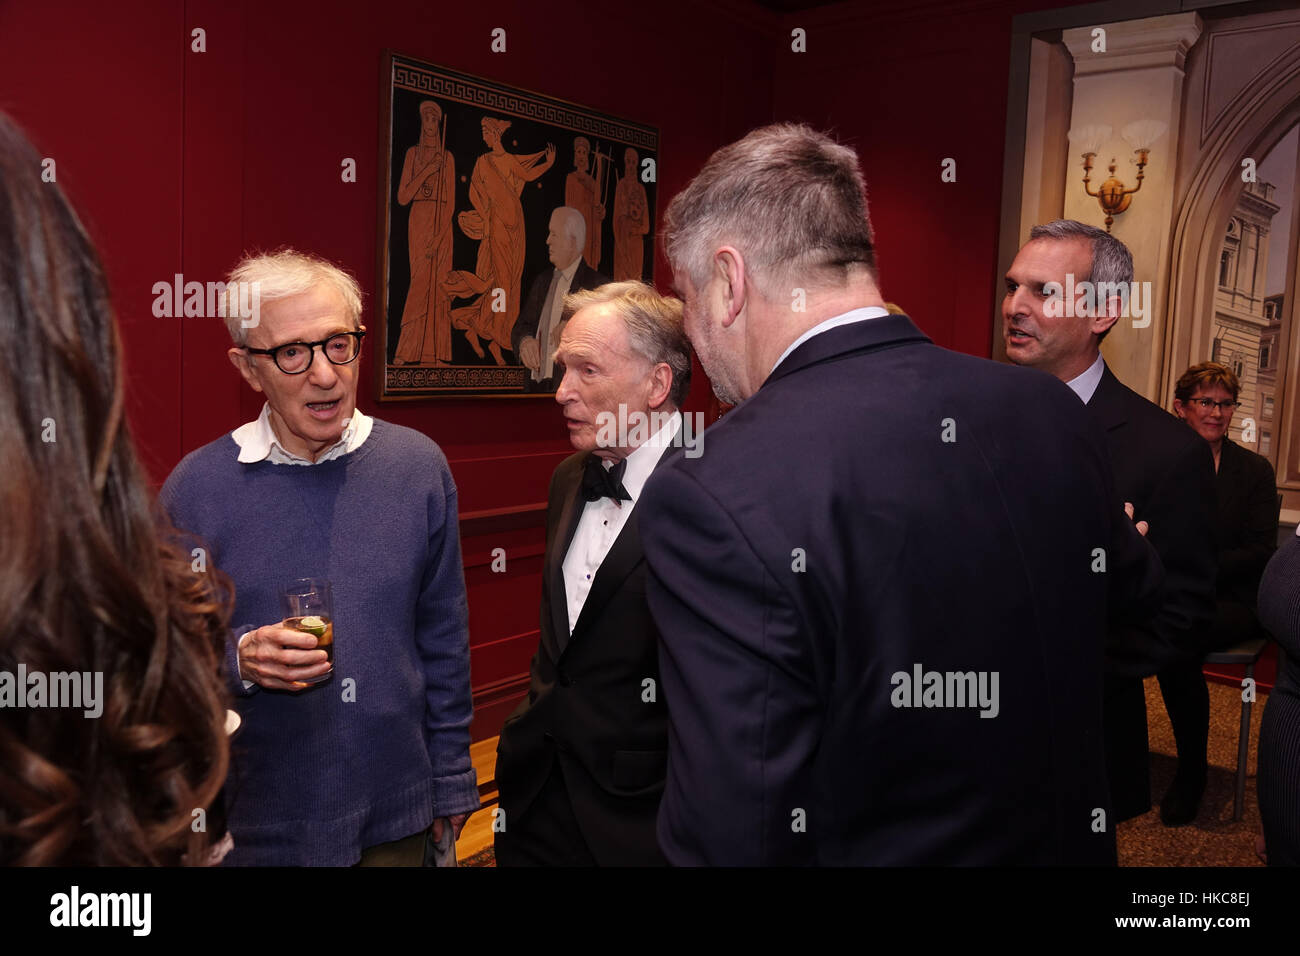 NEW YORK, NY - Woody Allen, Dick Cavett and Alec Baldwin at Dick Cavett's Birthday Celebration at a private club Stock Photo